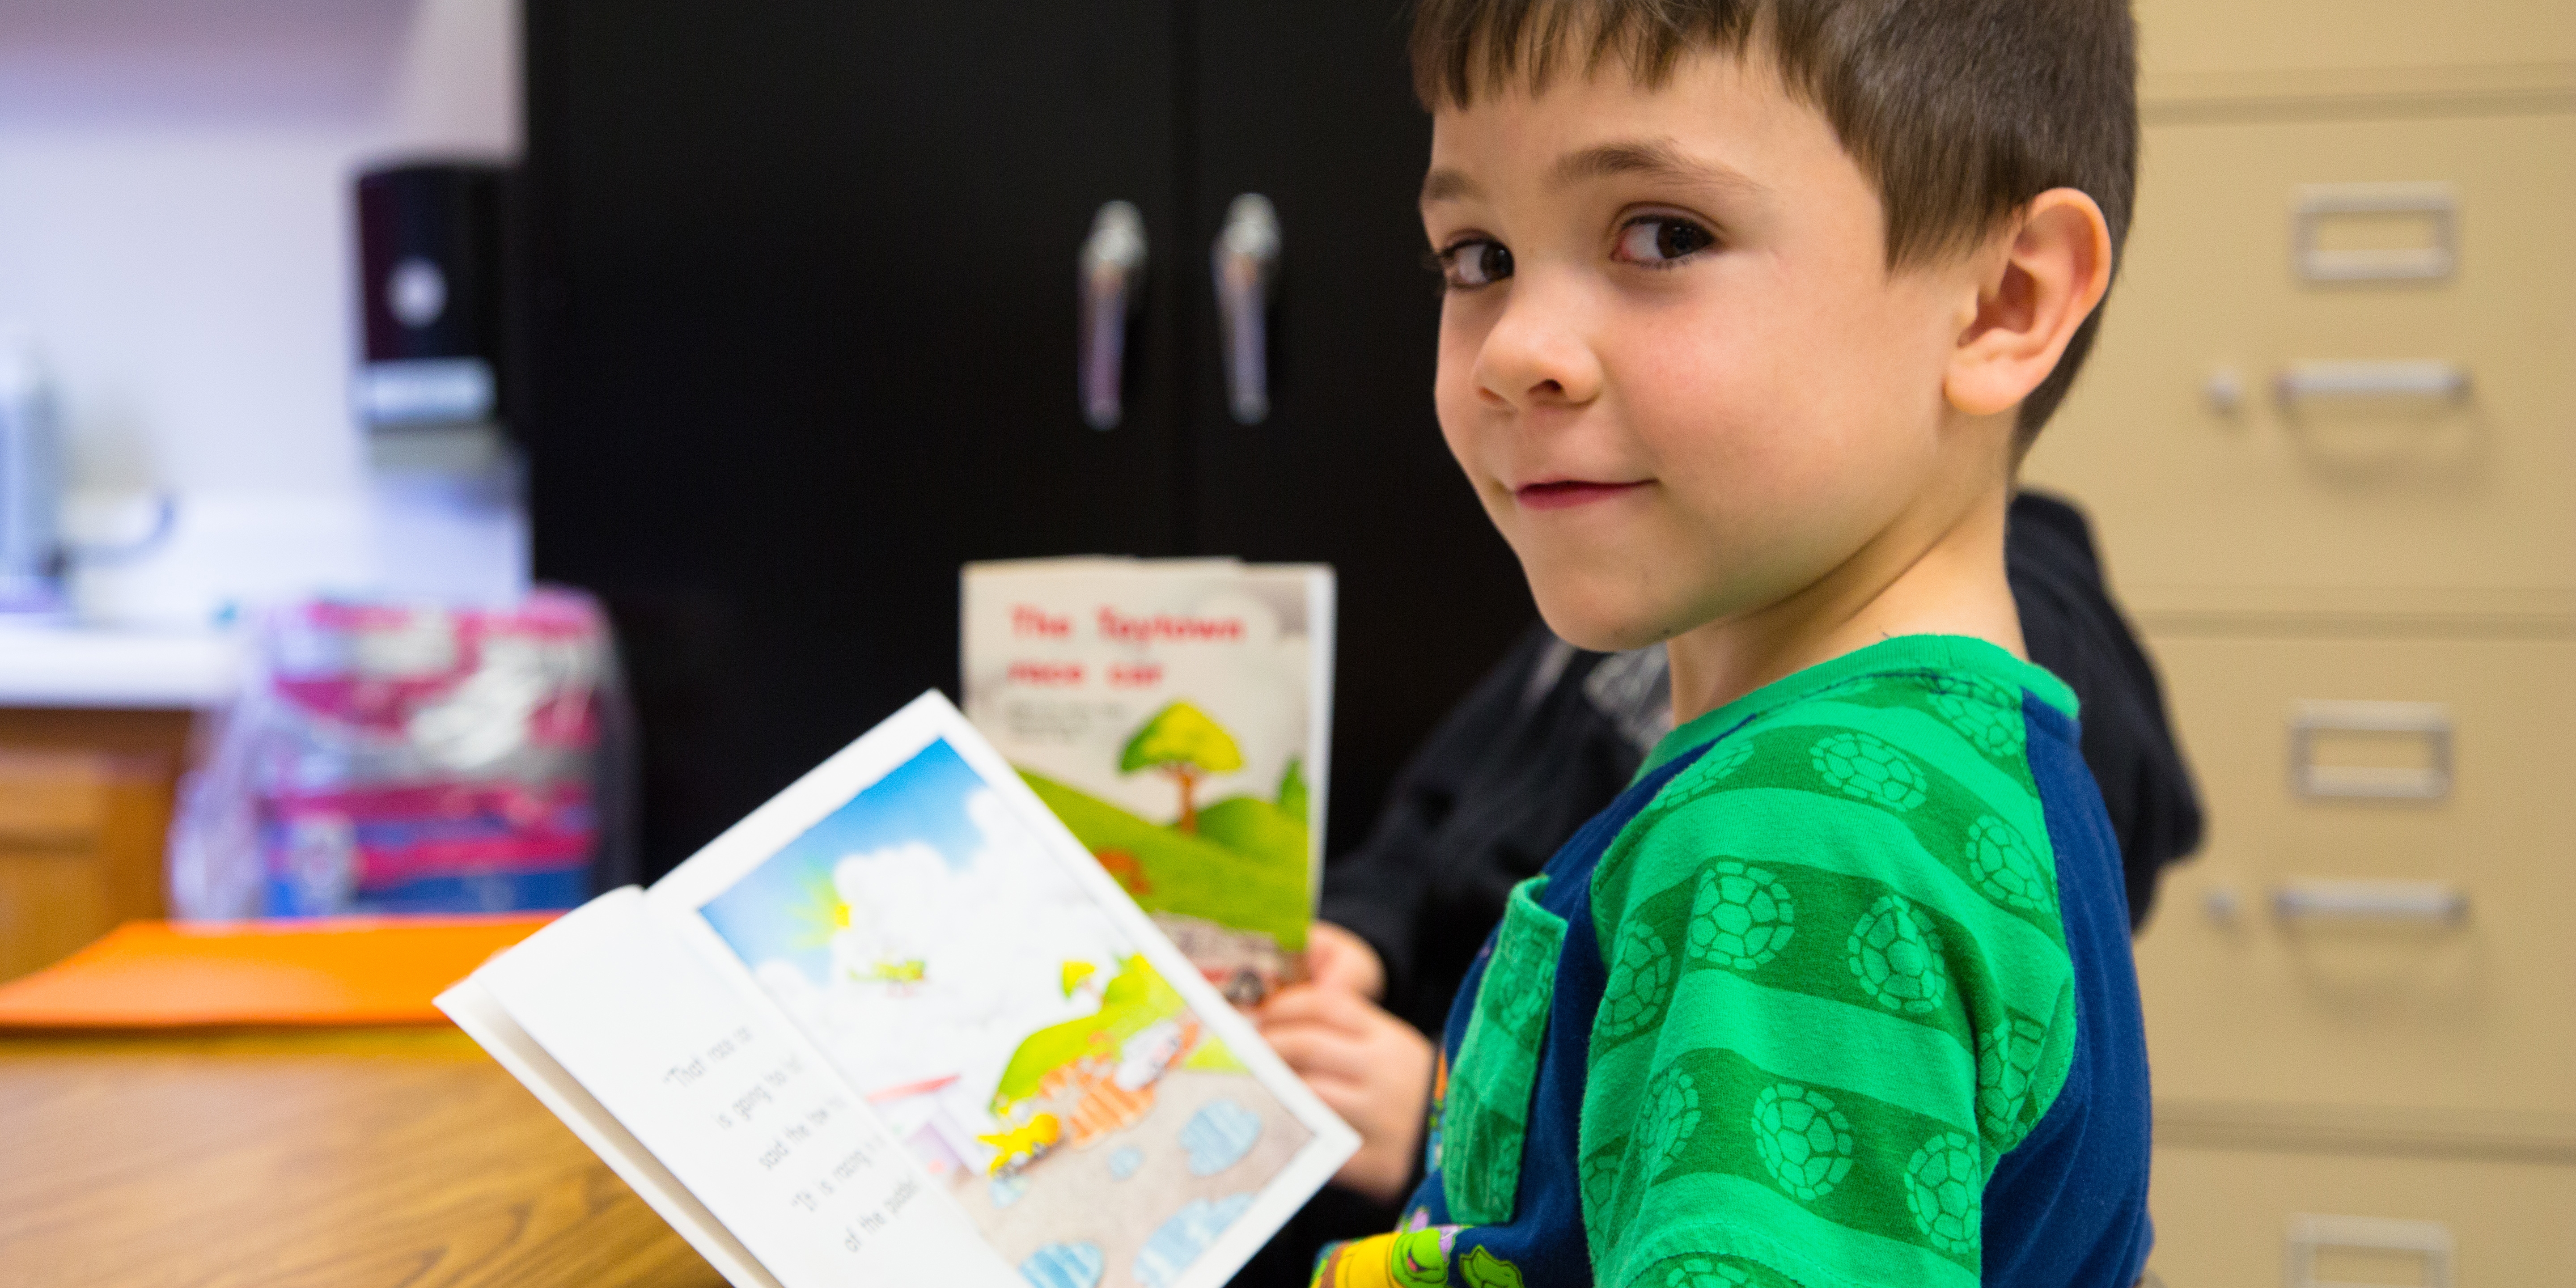 Brantley, 6, pauses while reading a book in his Kentucky classroom. Brantley is part of Save the Children's emergent reader literacy program which provides training, tools and support schools need to accelerate reading growth for struggling readers. Photo credit: Ellery Lamm / Save the Children 2018.